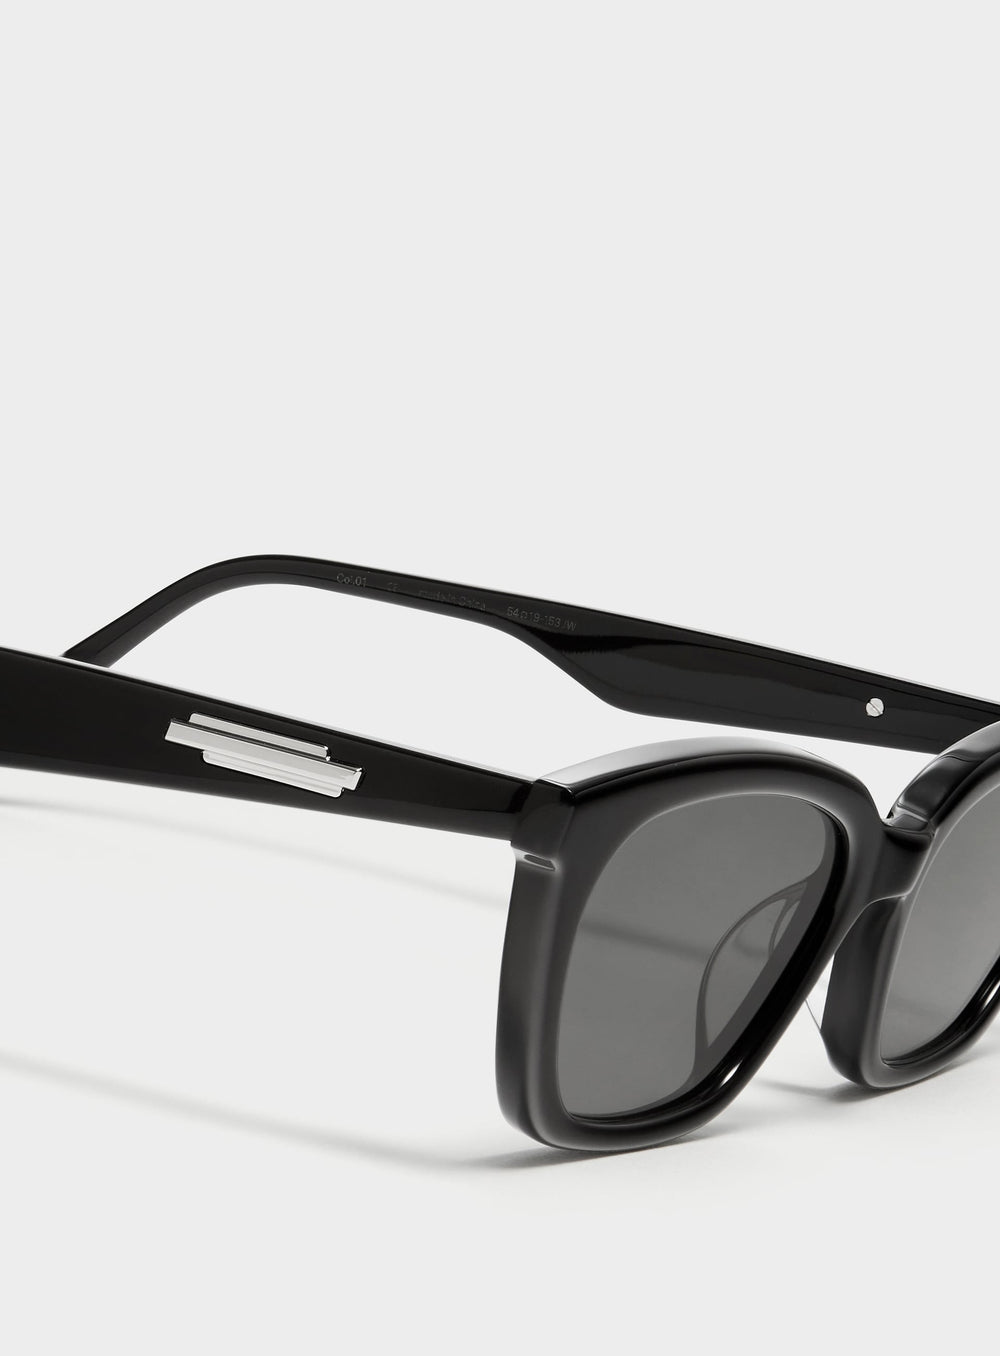 Close-up of Lust in black cat-eye Sunglasses lenses, high-quality eyewear by Mercury Retrograde Burr Puzzle Collection 